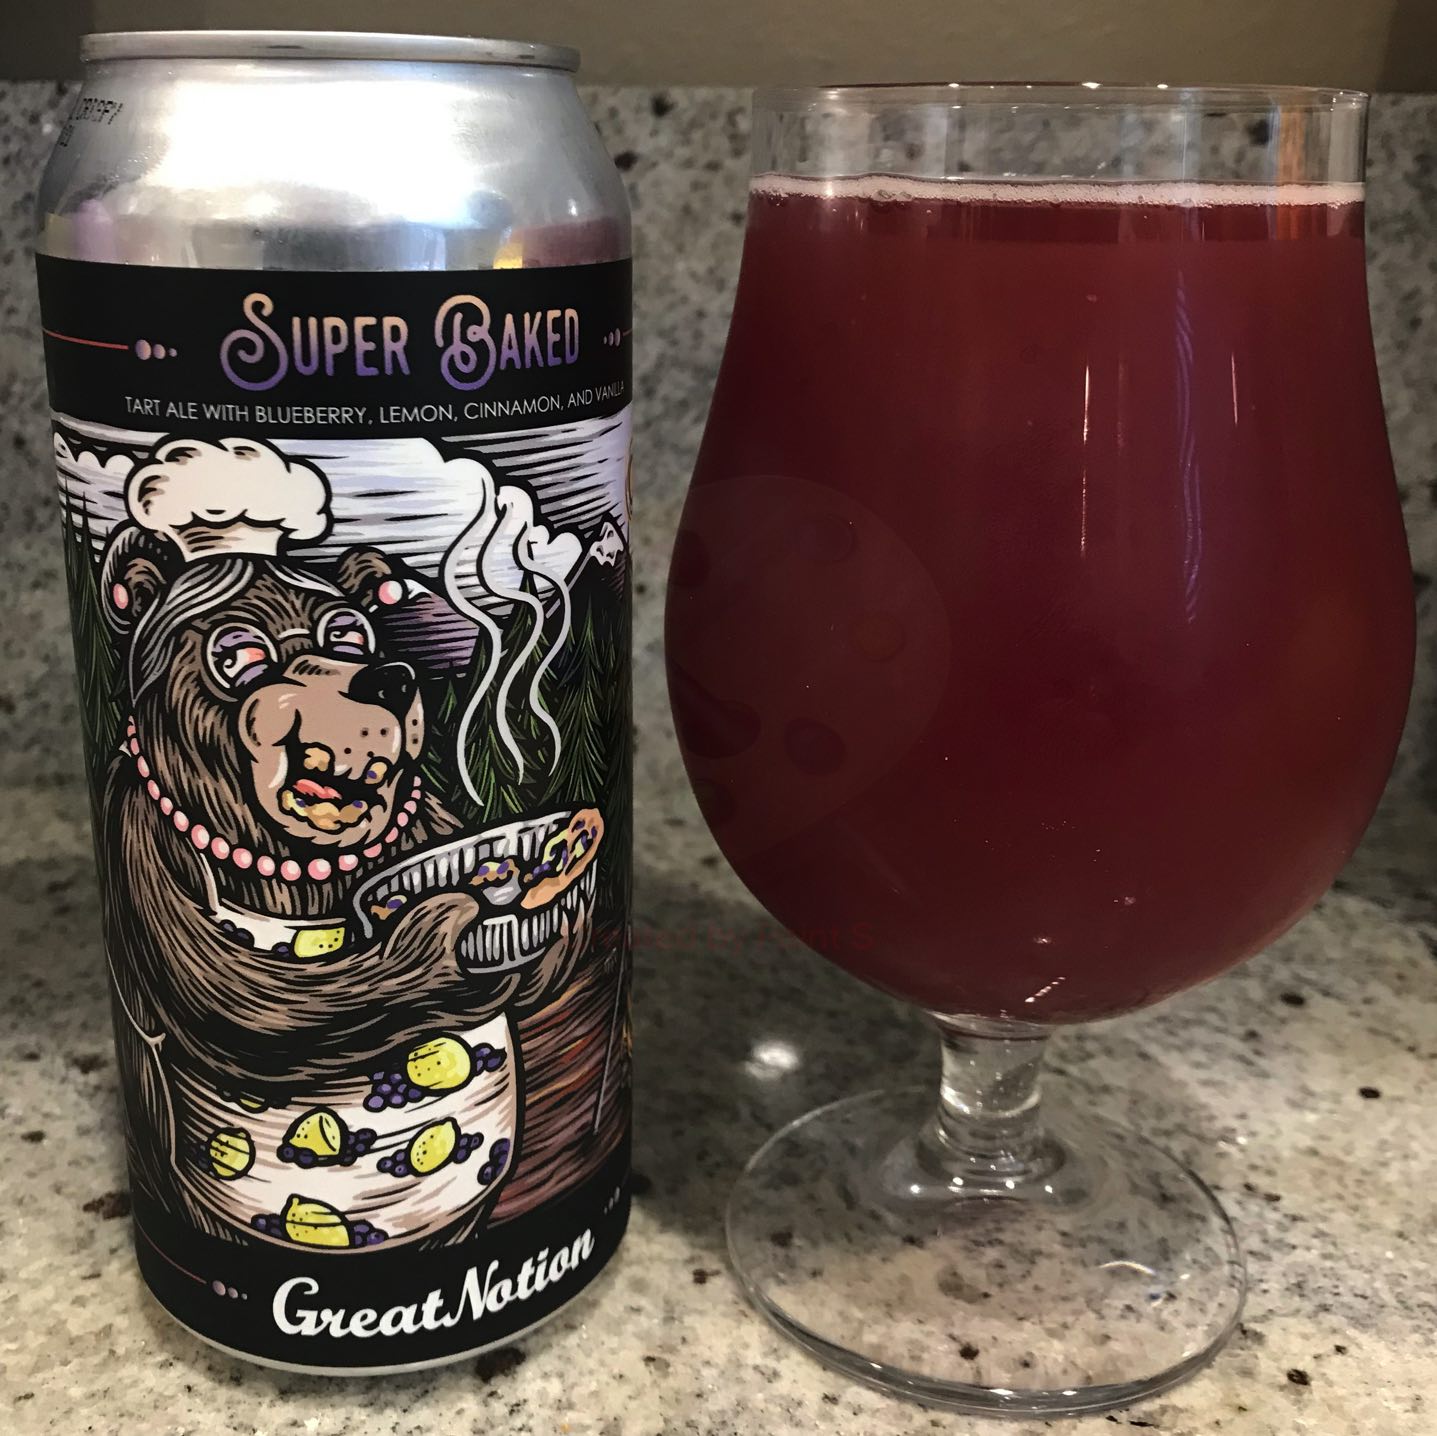 great notion beer company